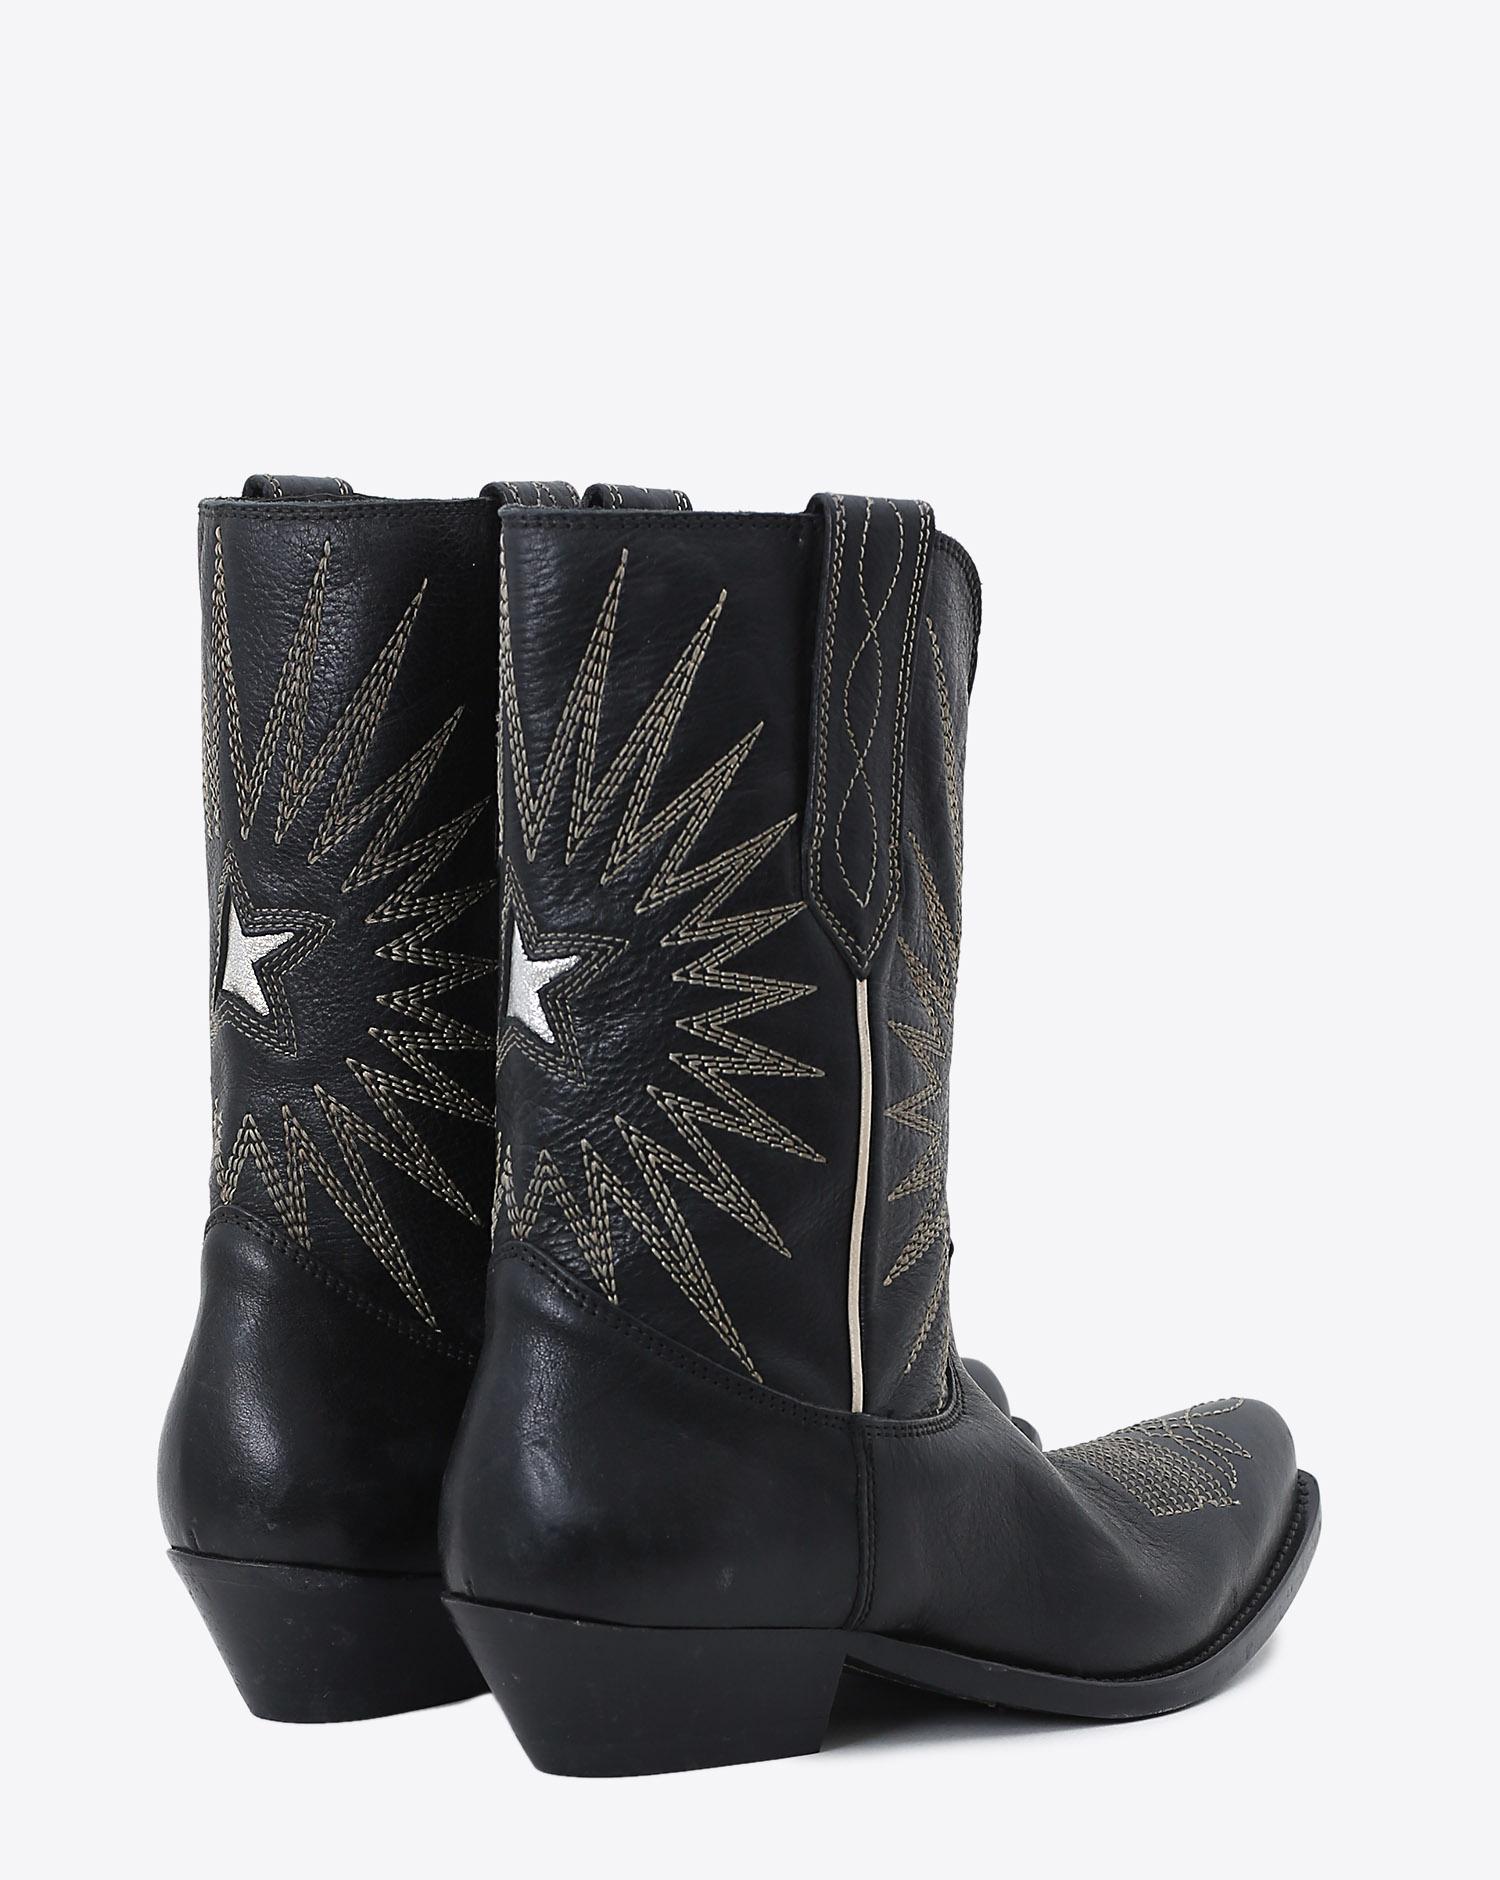 Golden Goose Woman Chaussures Collection Boots Wish Star Low - Black Leather   